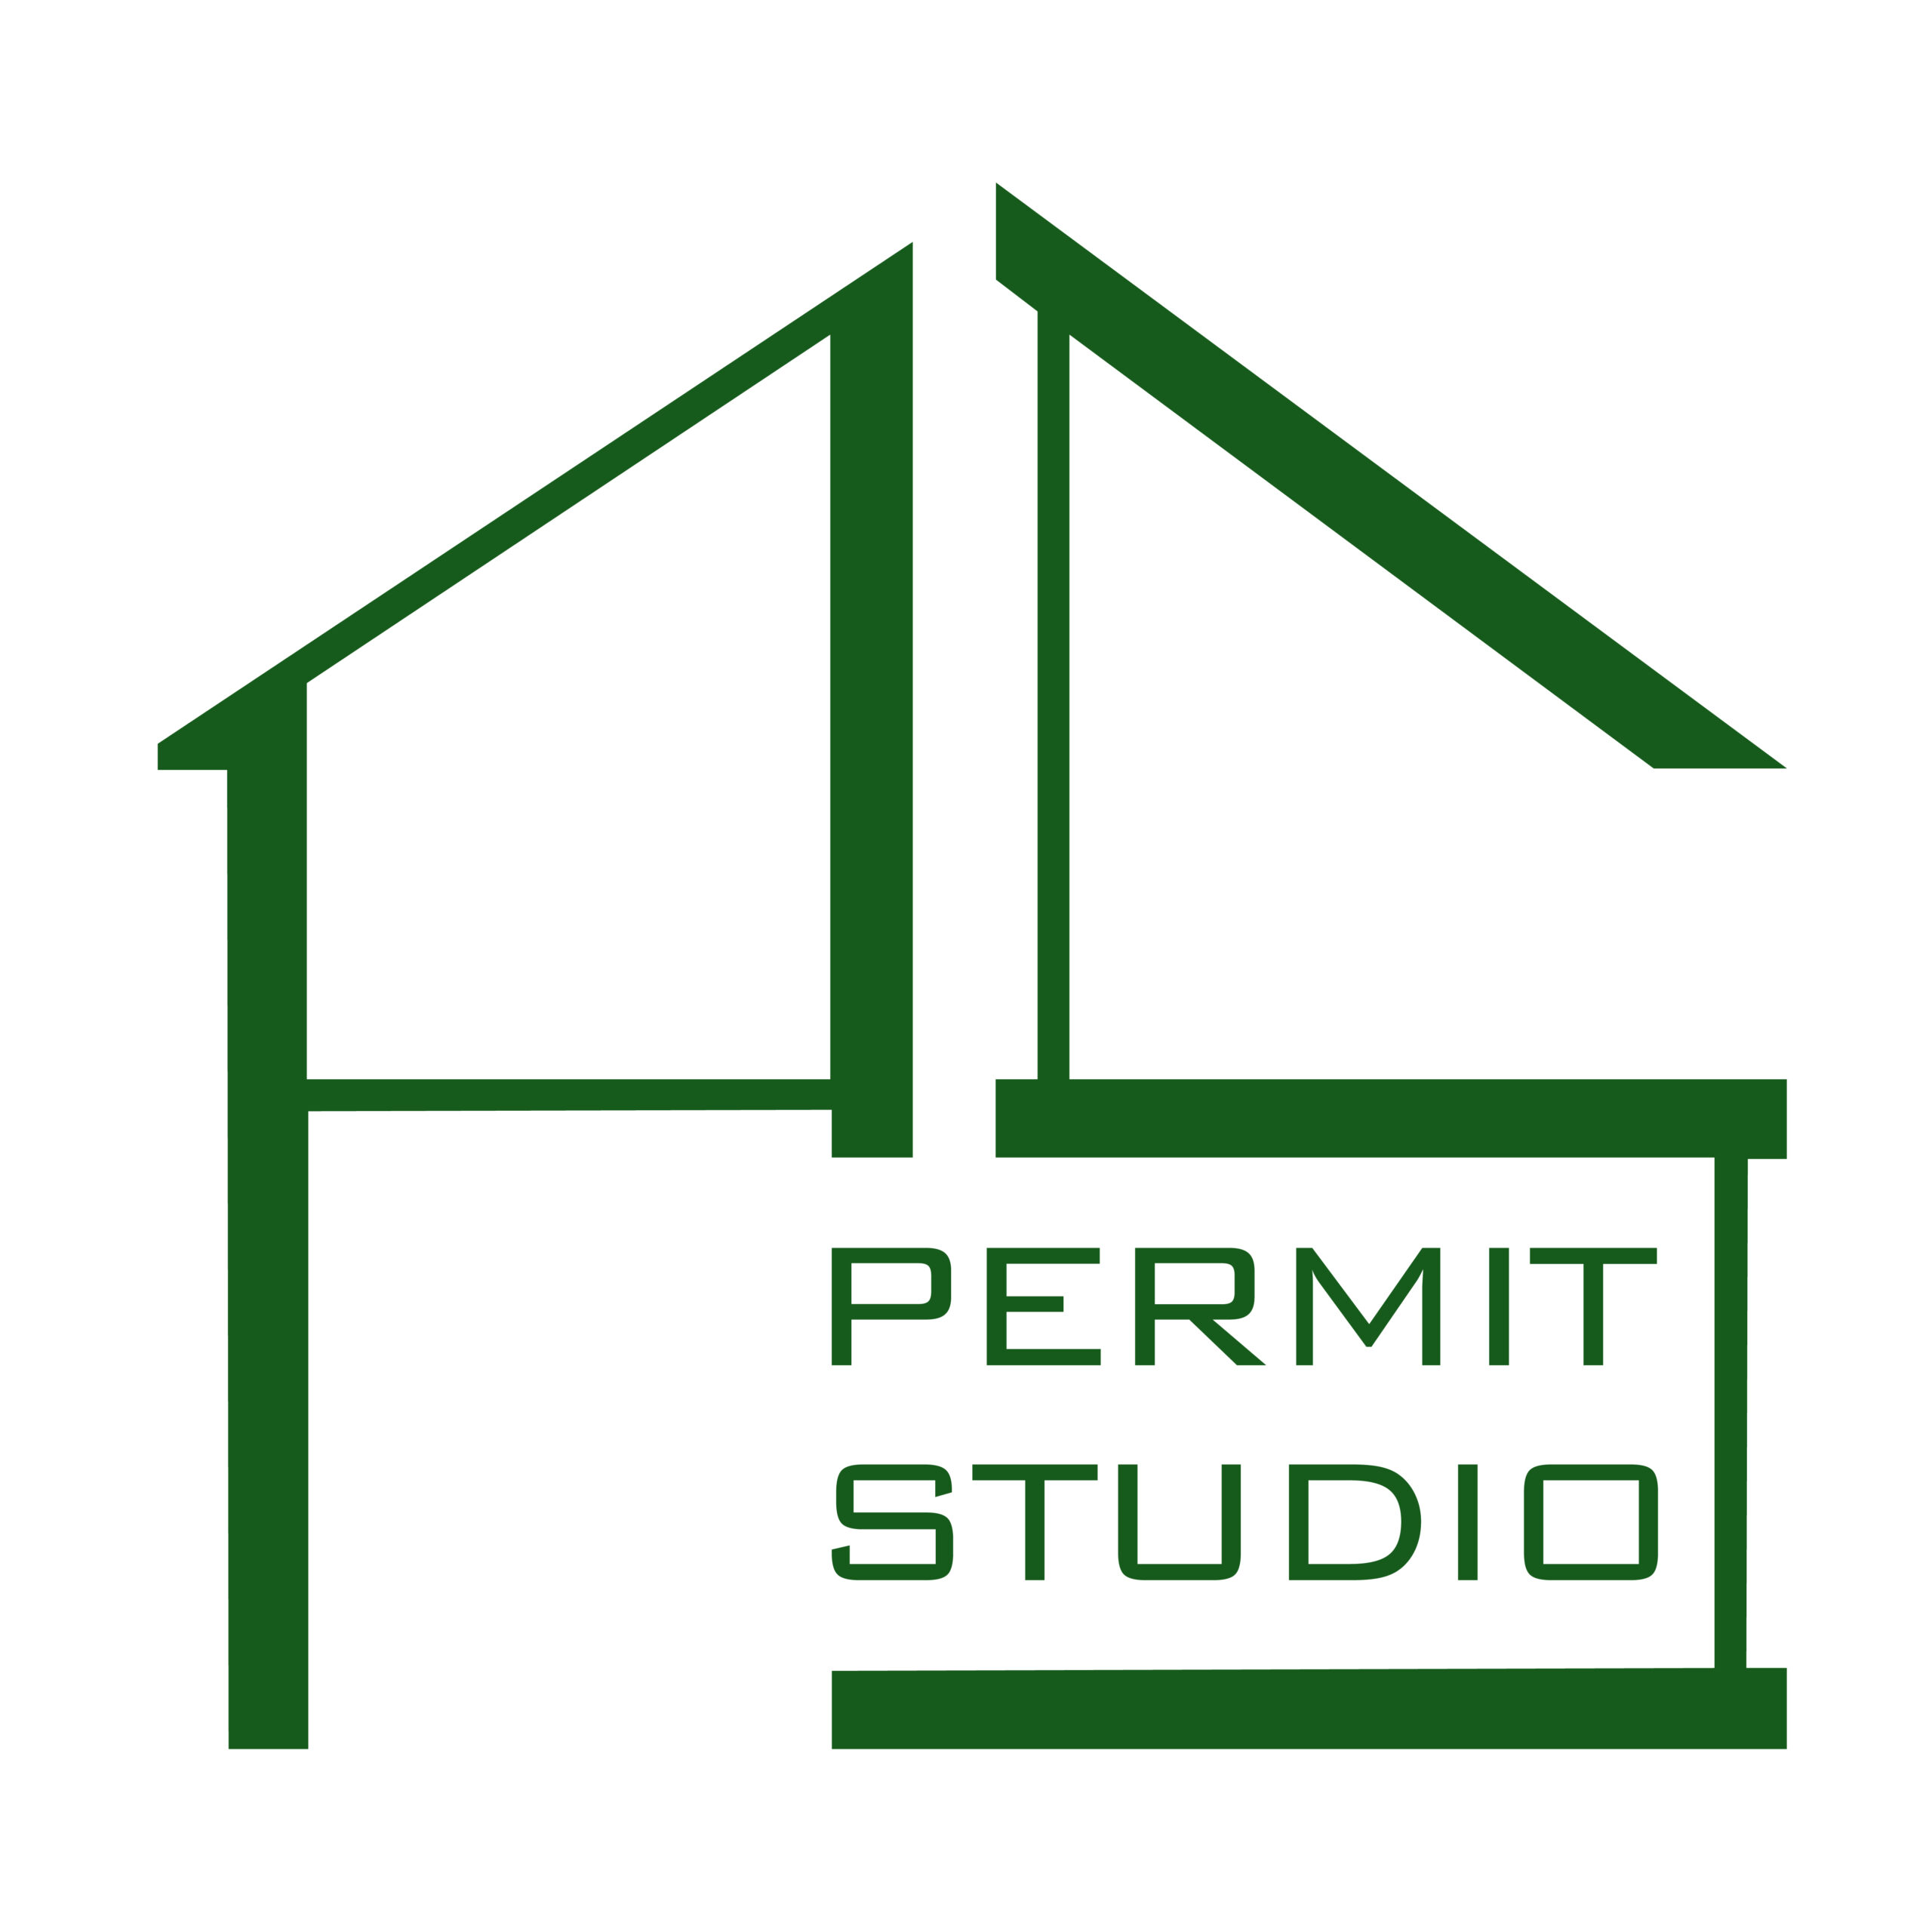 PERMIT STUDIO ADDS EASY PERMIT CHICAGO CONSULTING SERVICES TO CONTRACTORS AND CLIENTS IN THE CITY OF CHICAGO.